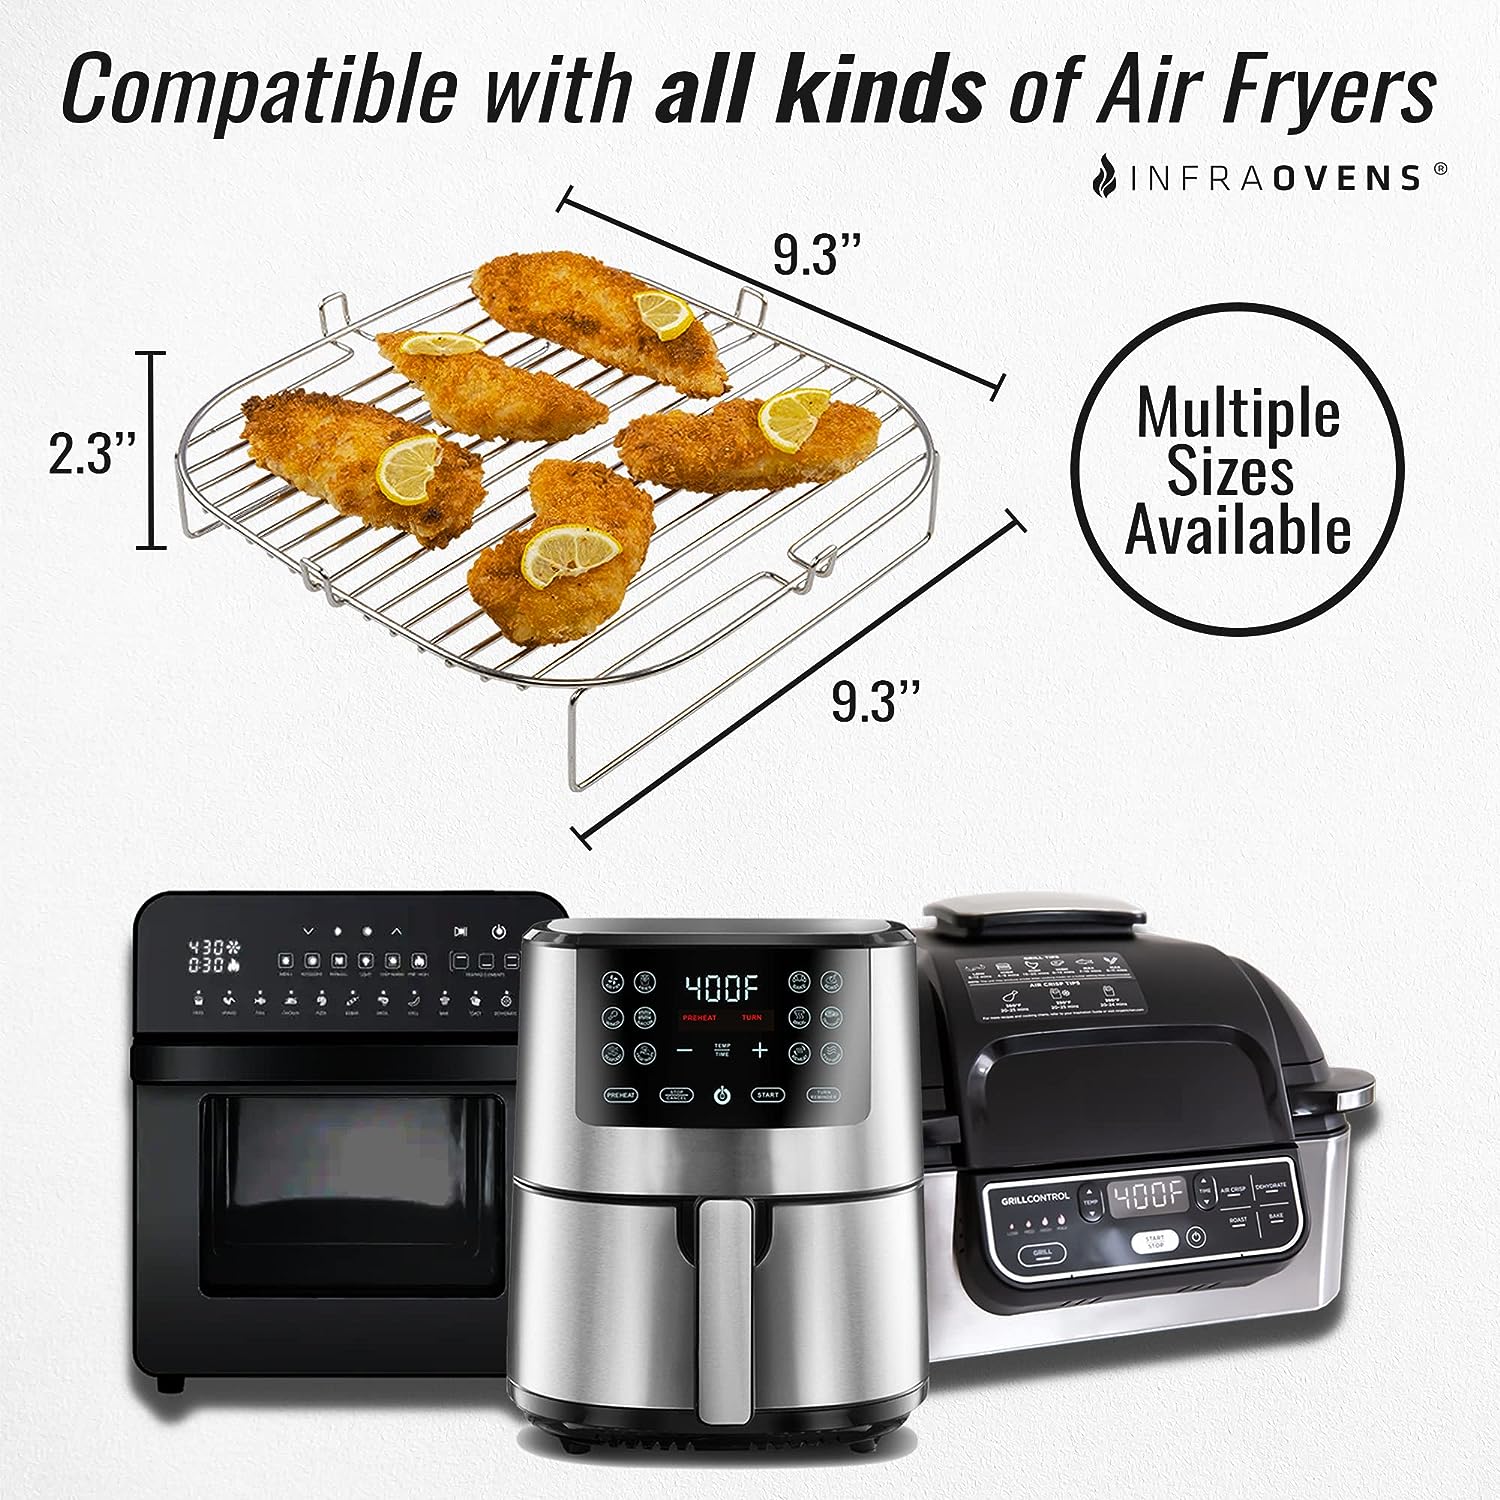 Air Fryer Rack, Guides, Liners and Cleaner Brush Accessories fits for Ninja  Foodi Grill 5 in 1, Instant Pot, Gourmia, Chefman, Power Vortex, etc